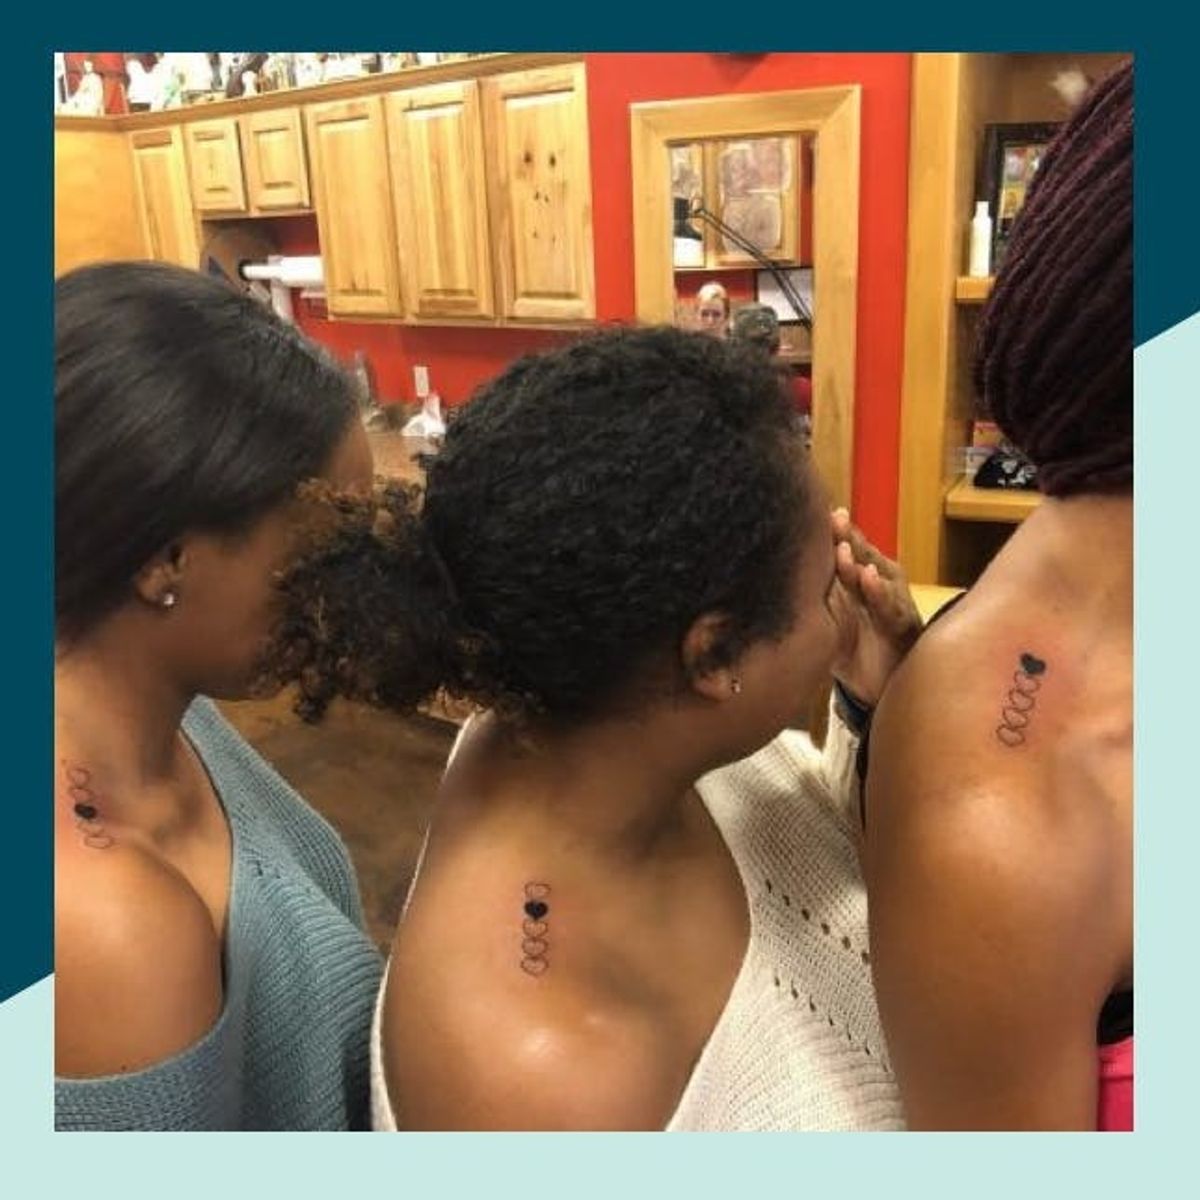 15 Sibling Tattoo Ideas to Copy